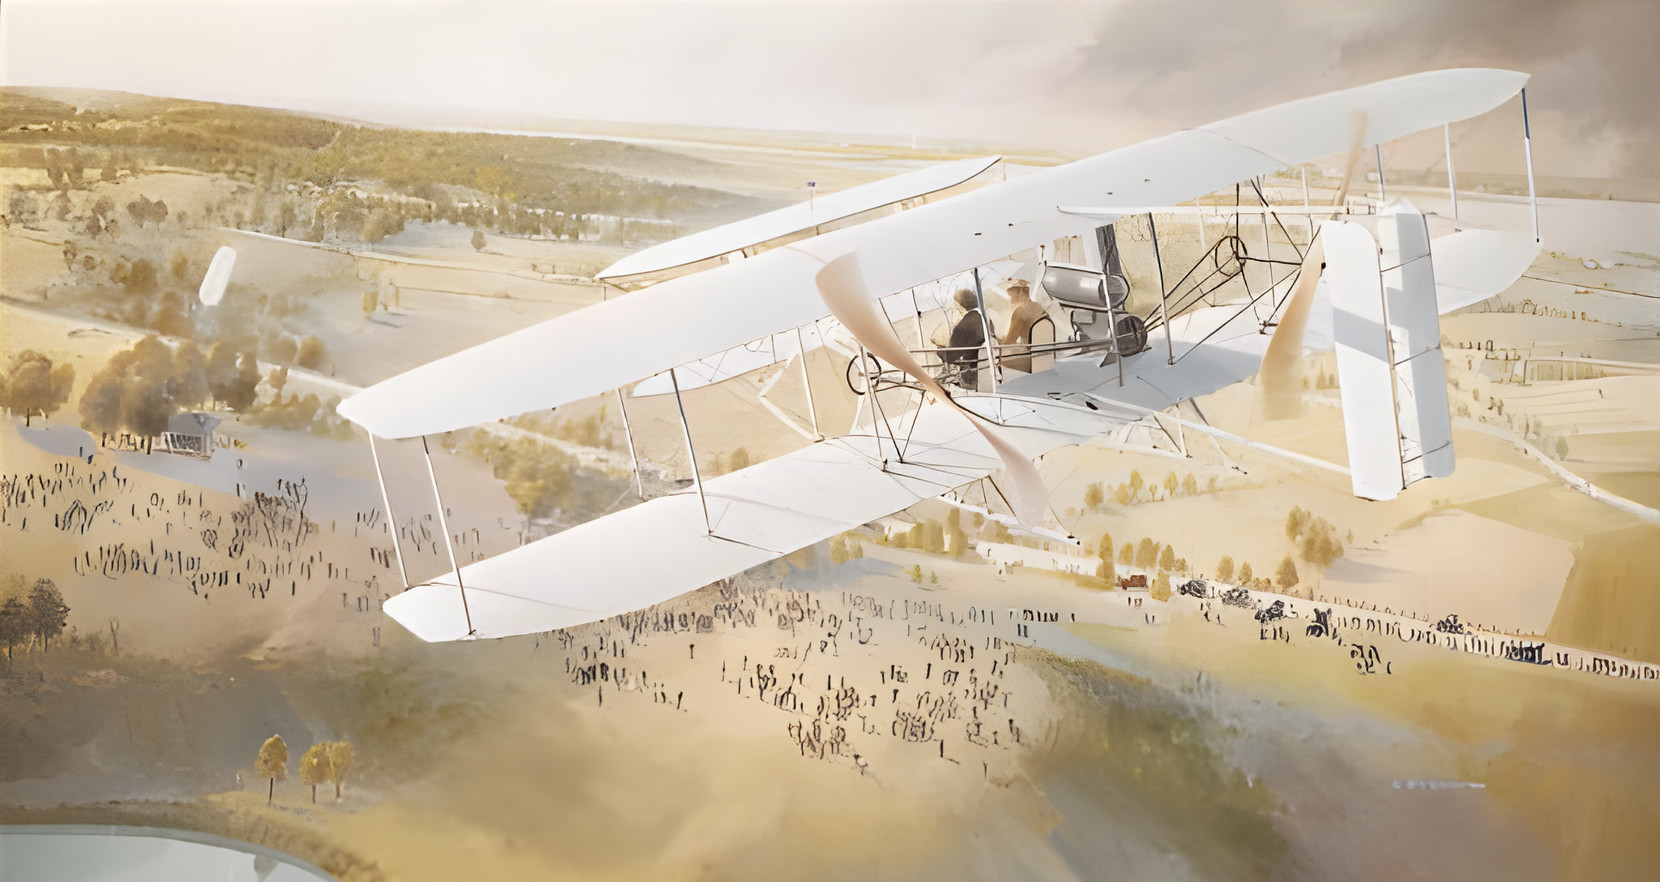 Lt. Benjamin Foulois and Orville Wright fly over Virginia countryside in 1909, testing a Wright flier for the U.S. Army. The test was successful and Foulois began a lifetime of promoting U.S. airpower.